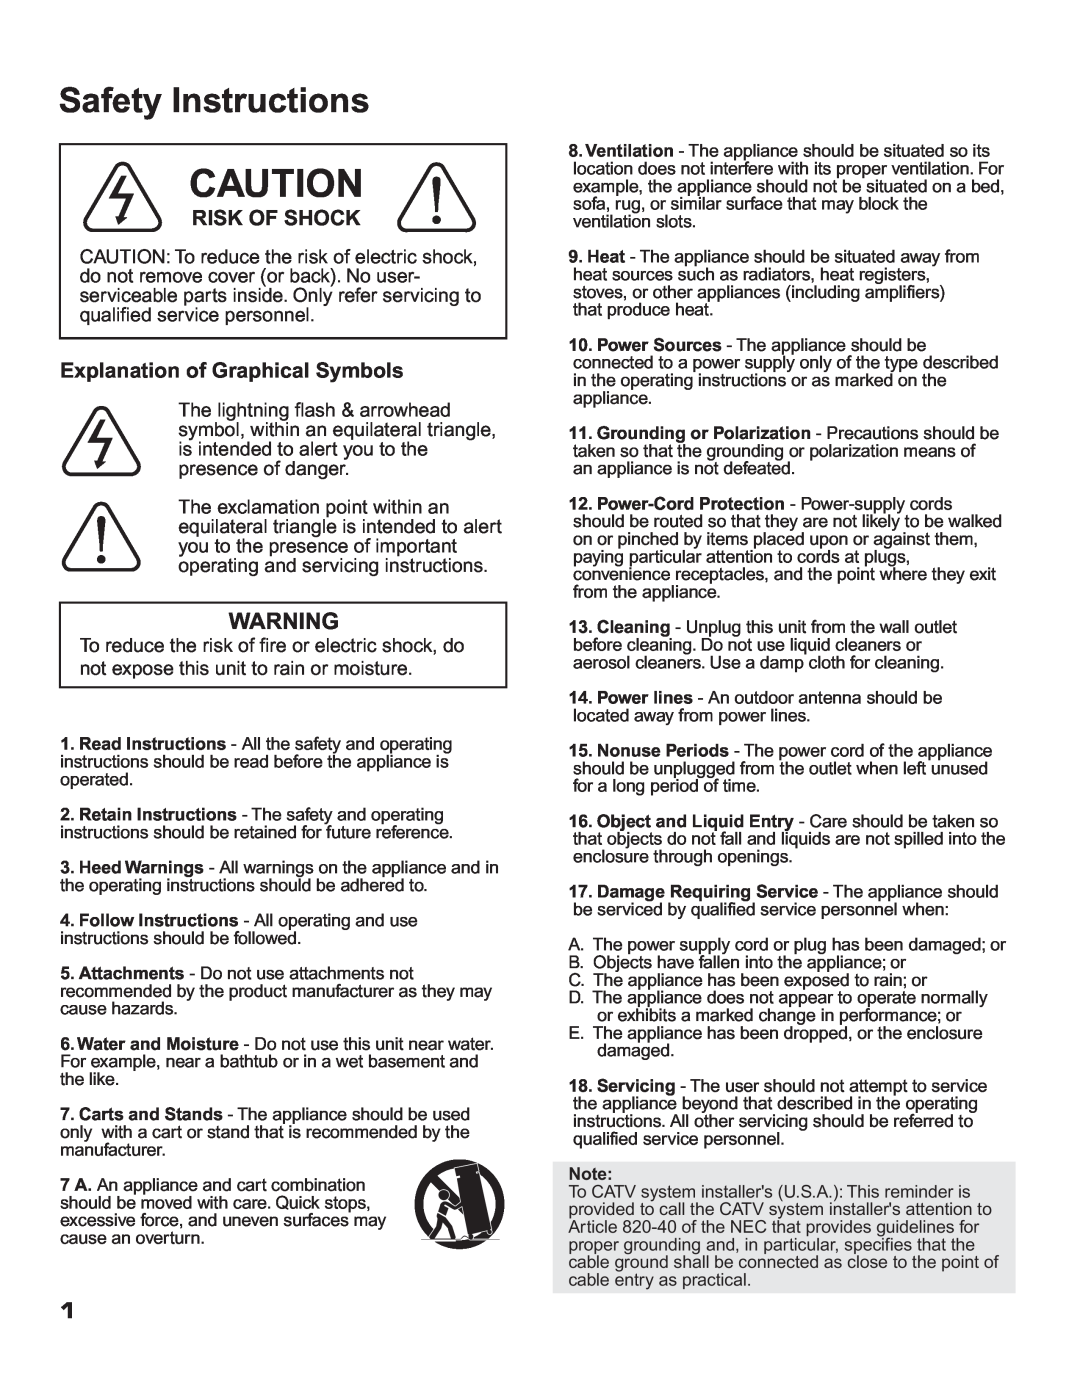 VocoPro UHF-3800 manual Risk Of Shock, Explanation of Graphical Symbols, Safety Instructions 